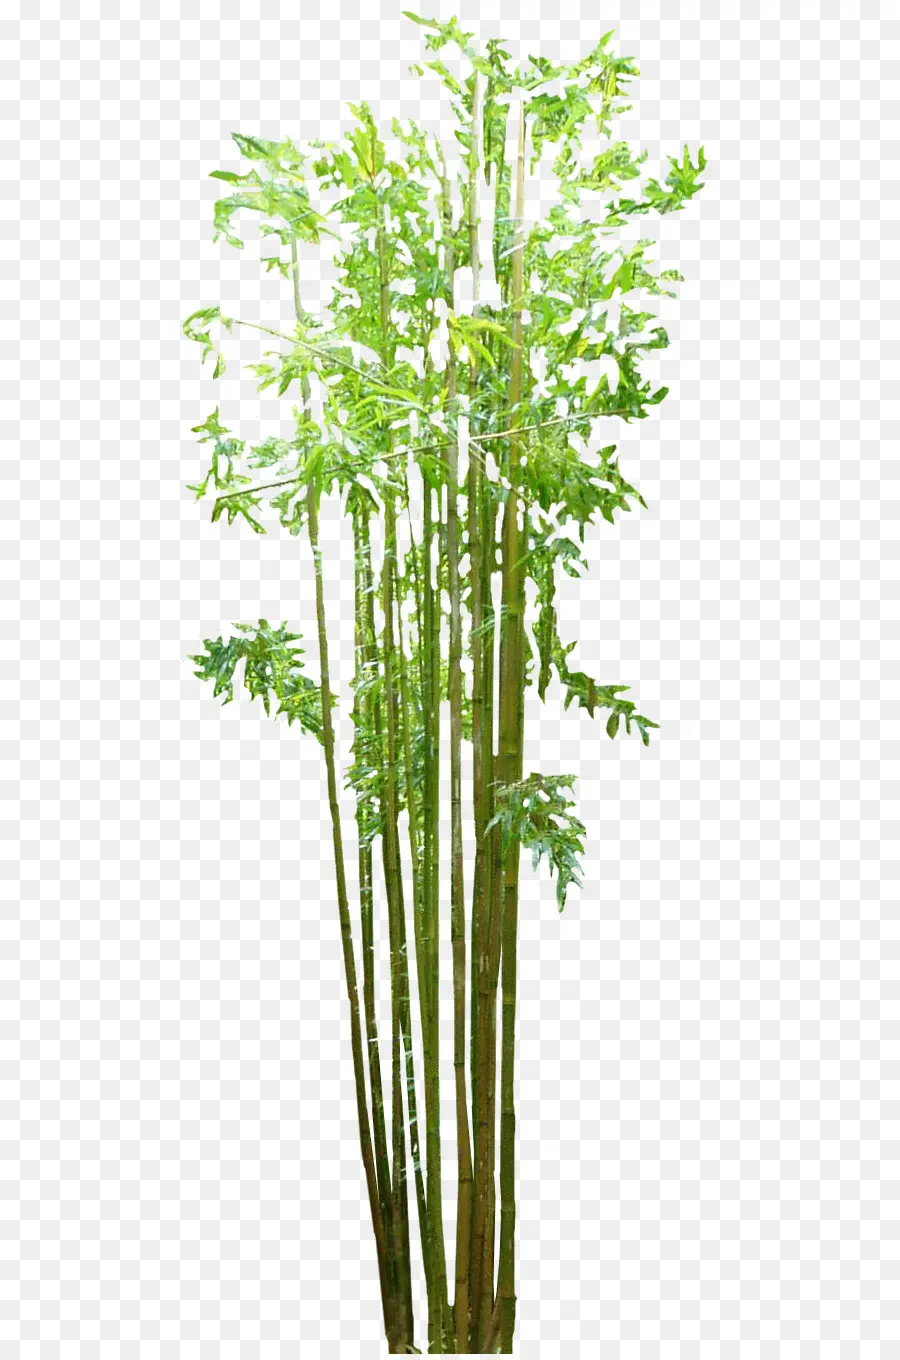 Bamboo，Grasses PNG